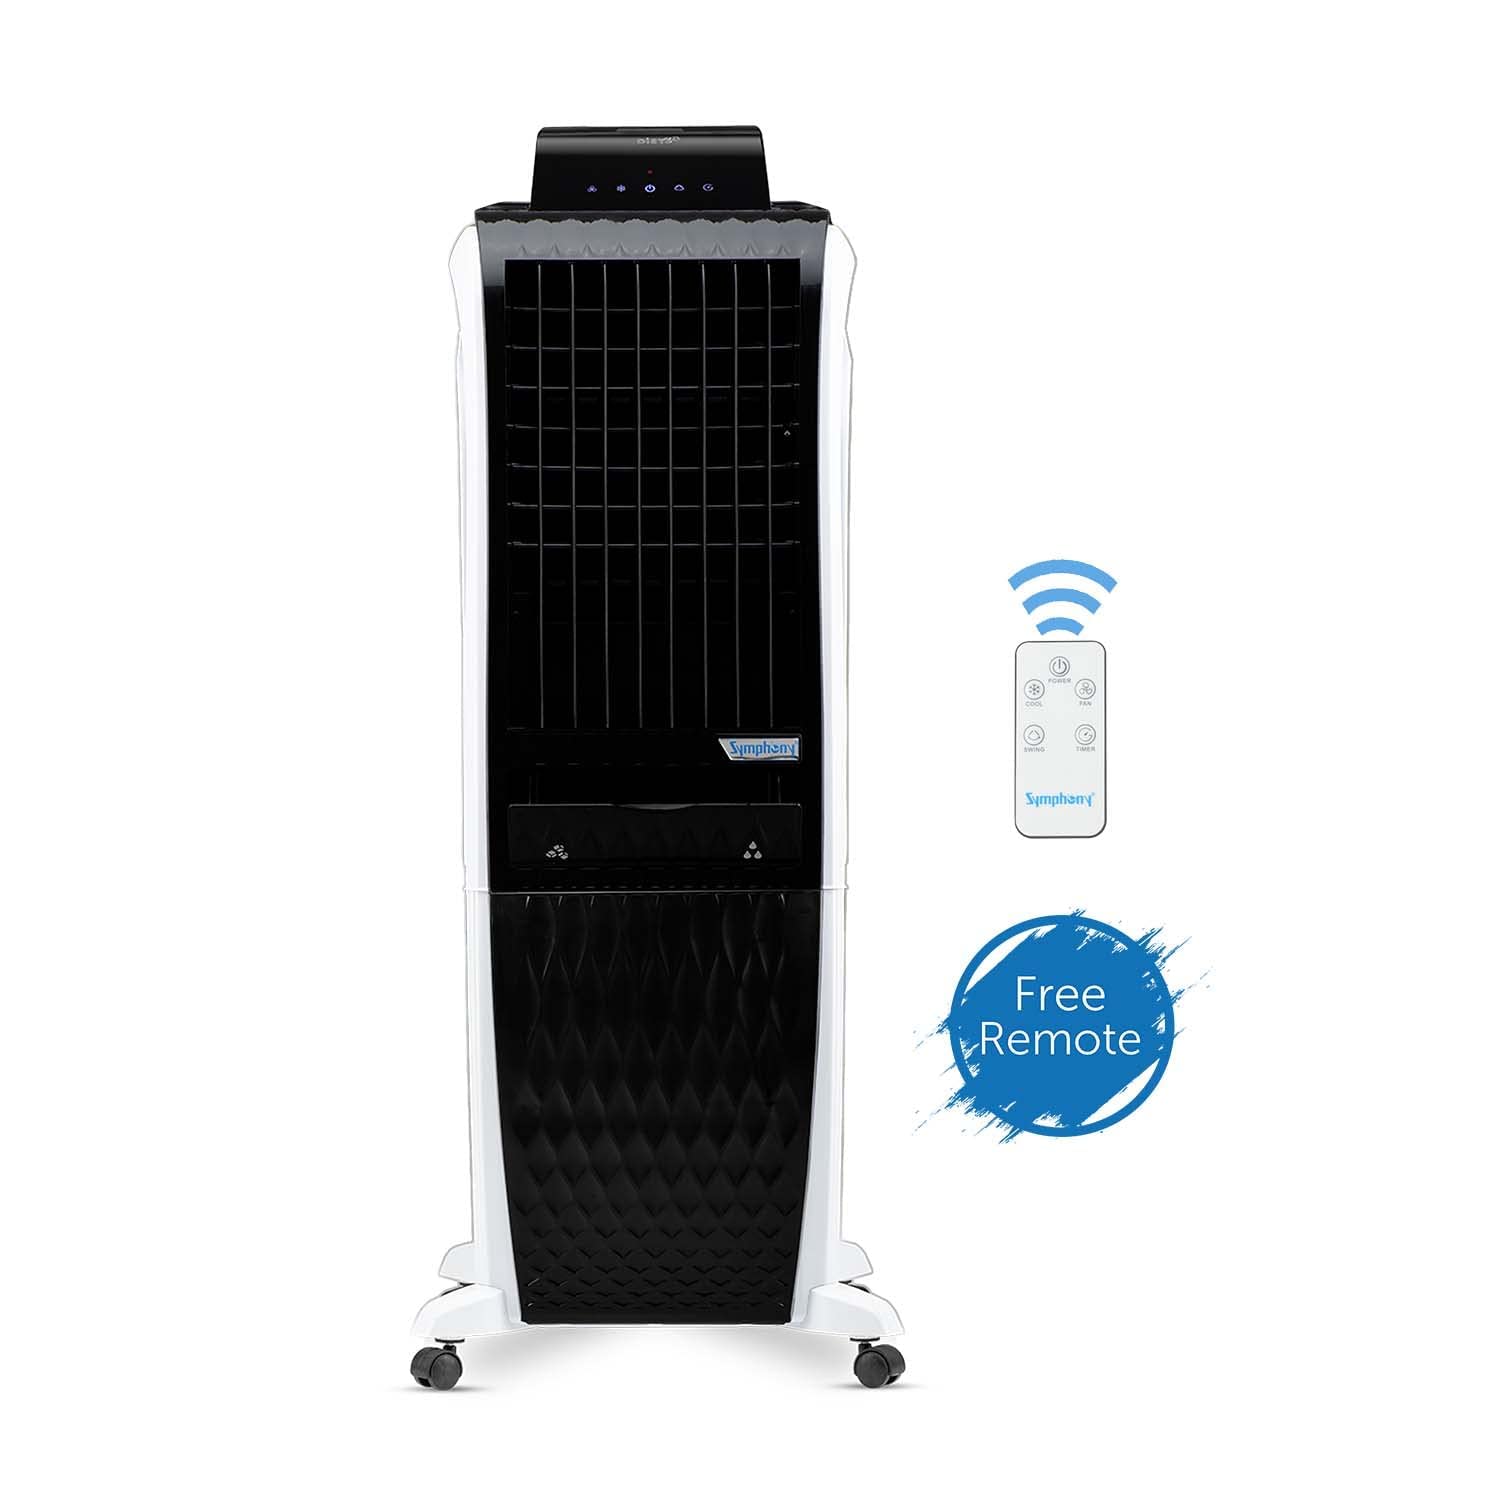 Symphony Diet 3D 30i Portable Tower Air Cooler For Home with 3-Side Honeycomb Pads, Automatic Pop-Up Touchscreen, i-Pure Technology and Low Power Consumption (30L, White & Black)